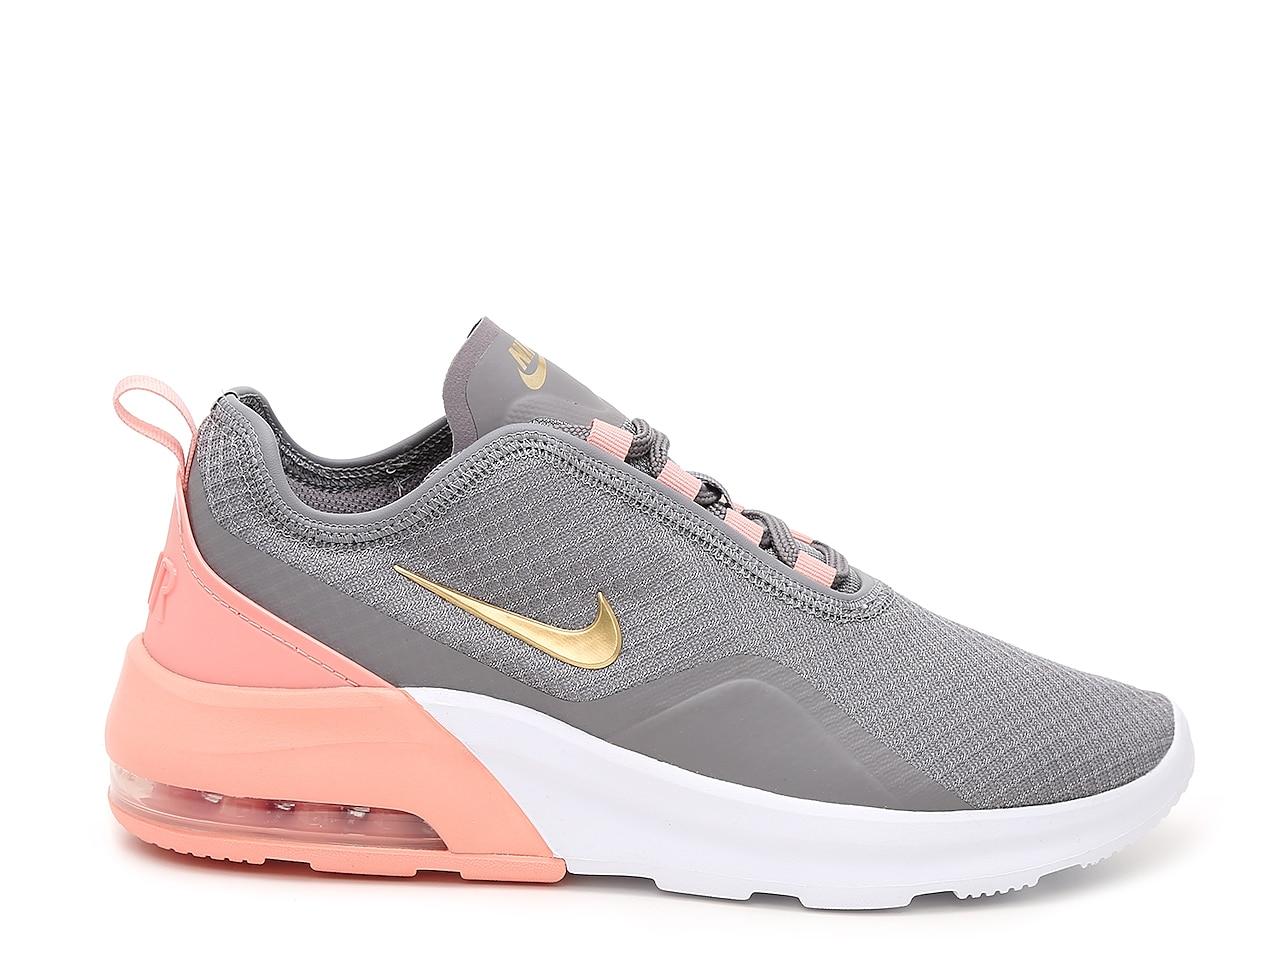 Nike Air Max Motion 2 Shoes in Grey/Pink/White (Gray) | Lyst